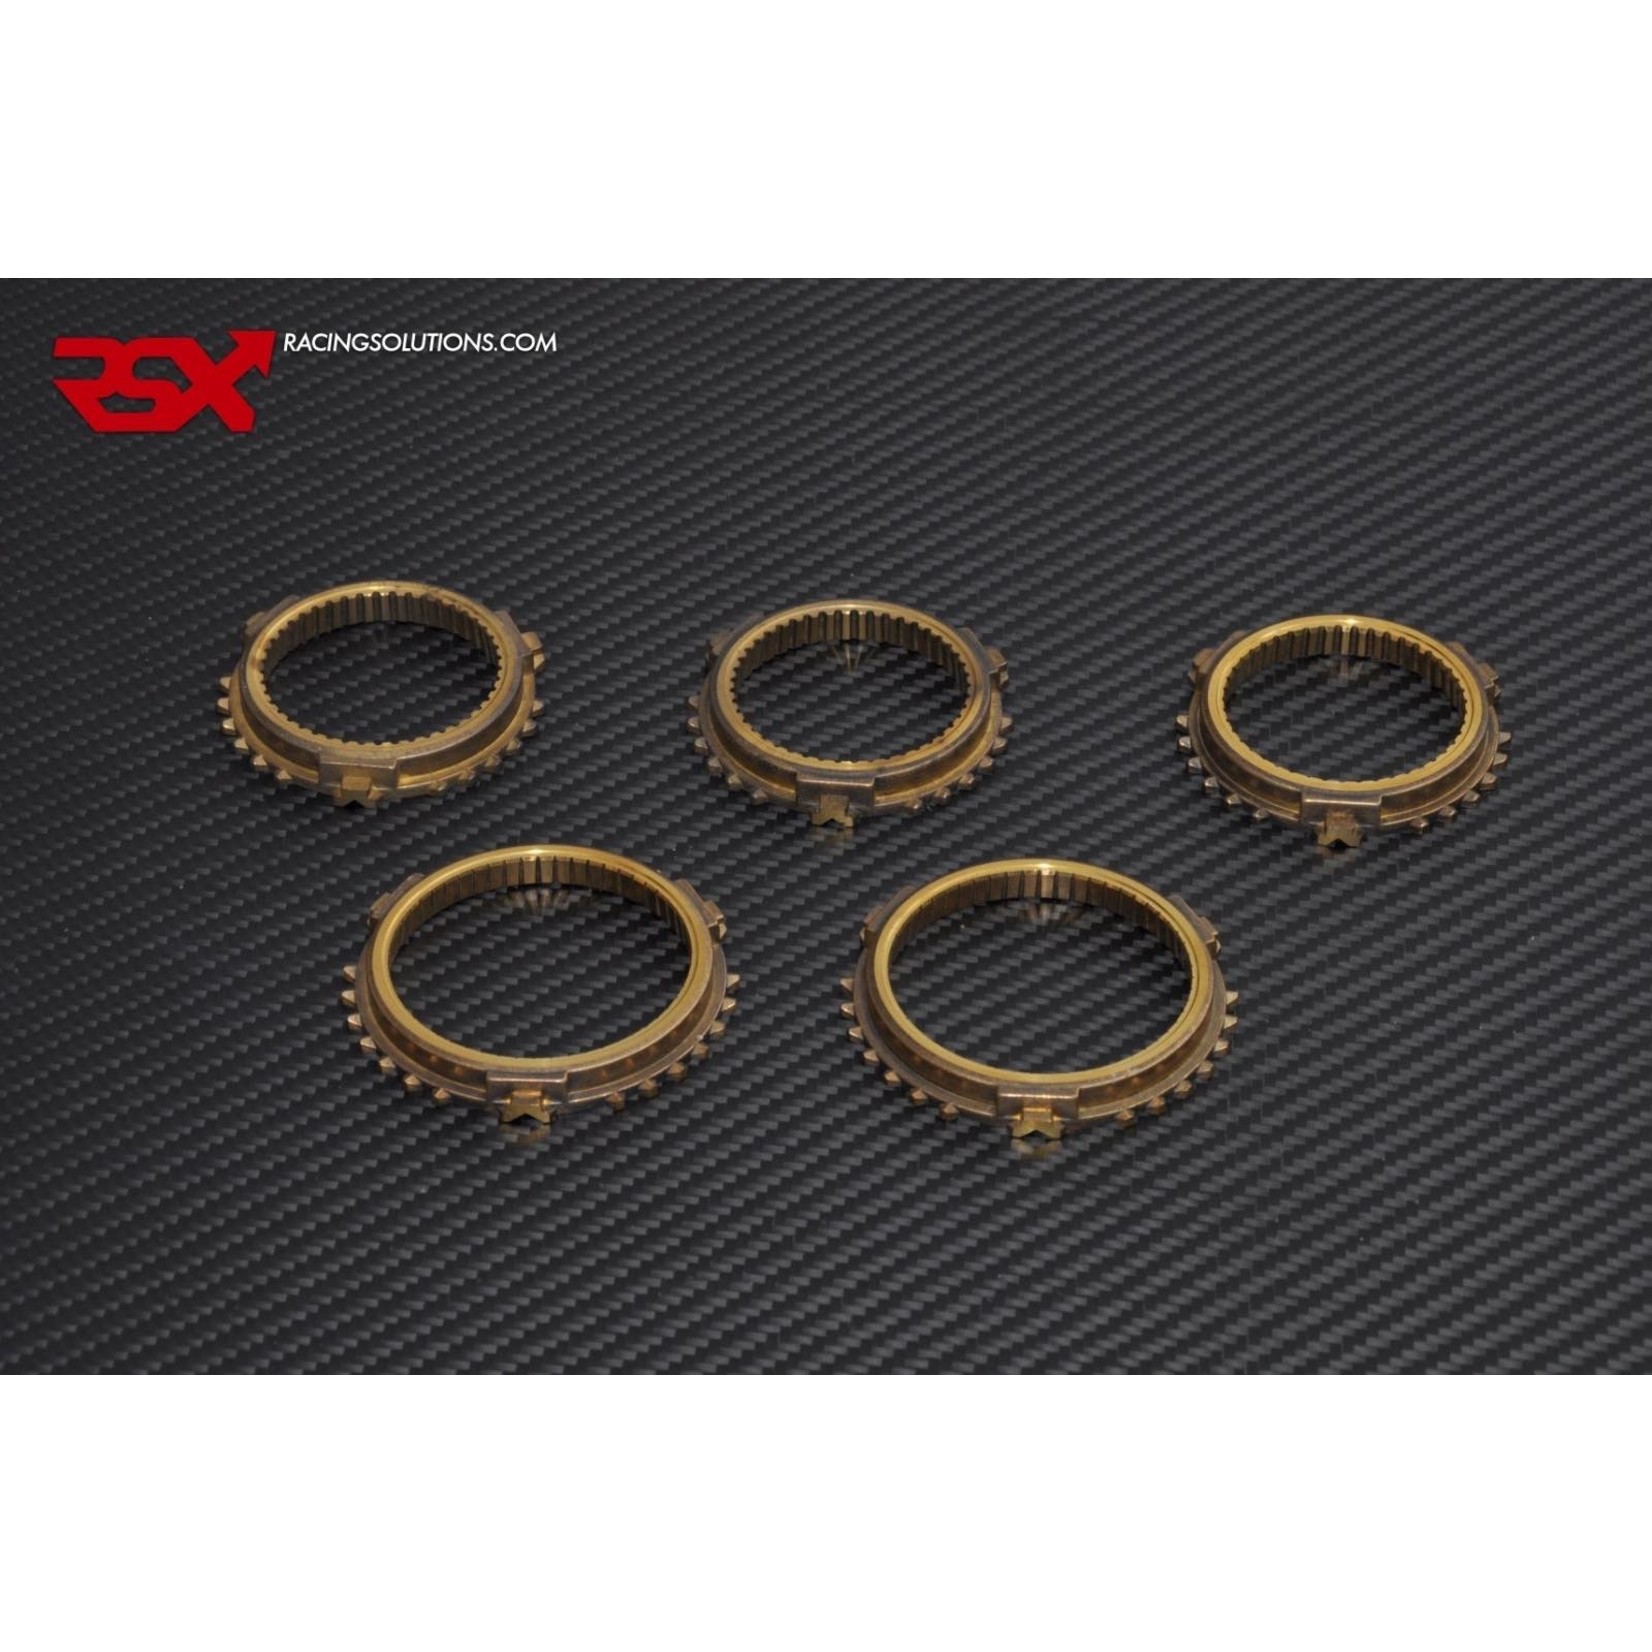 RSX copper alloy synchro ring